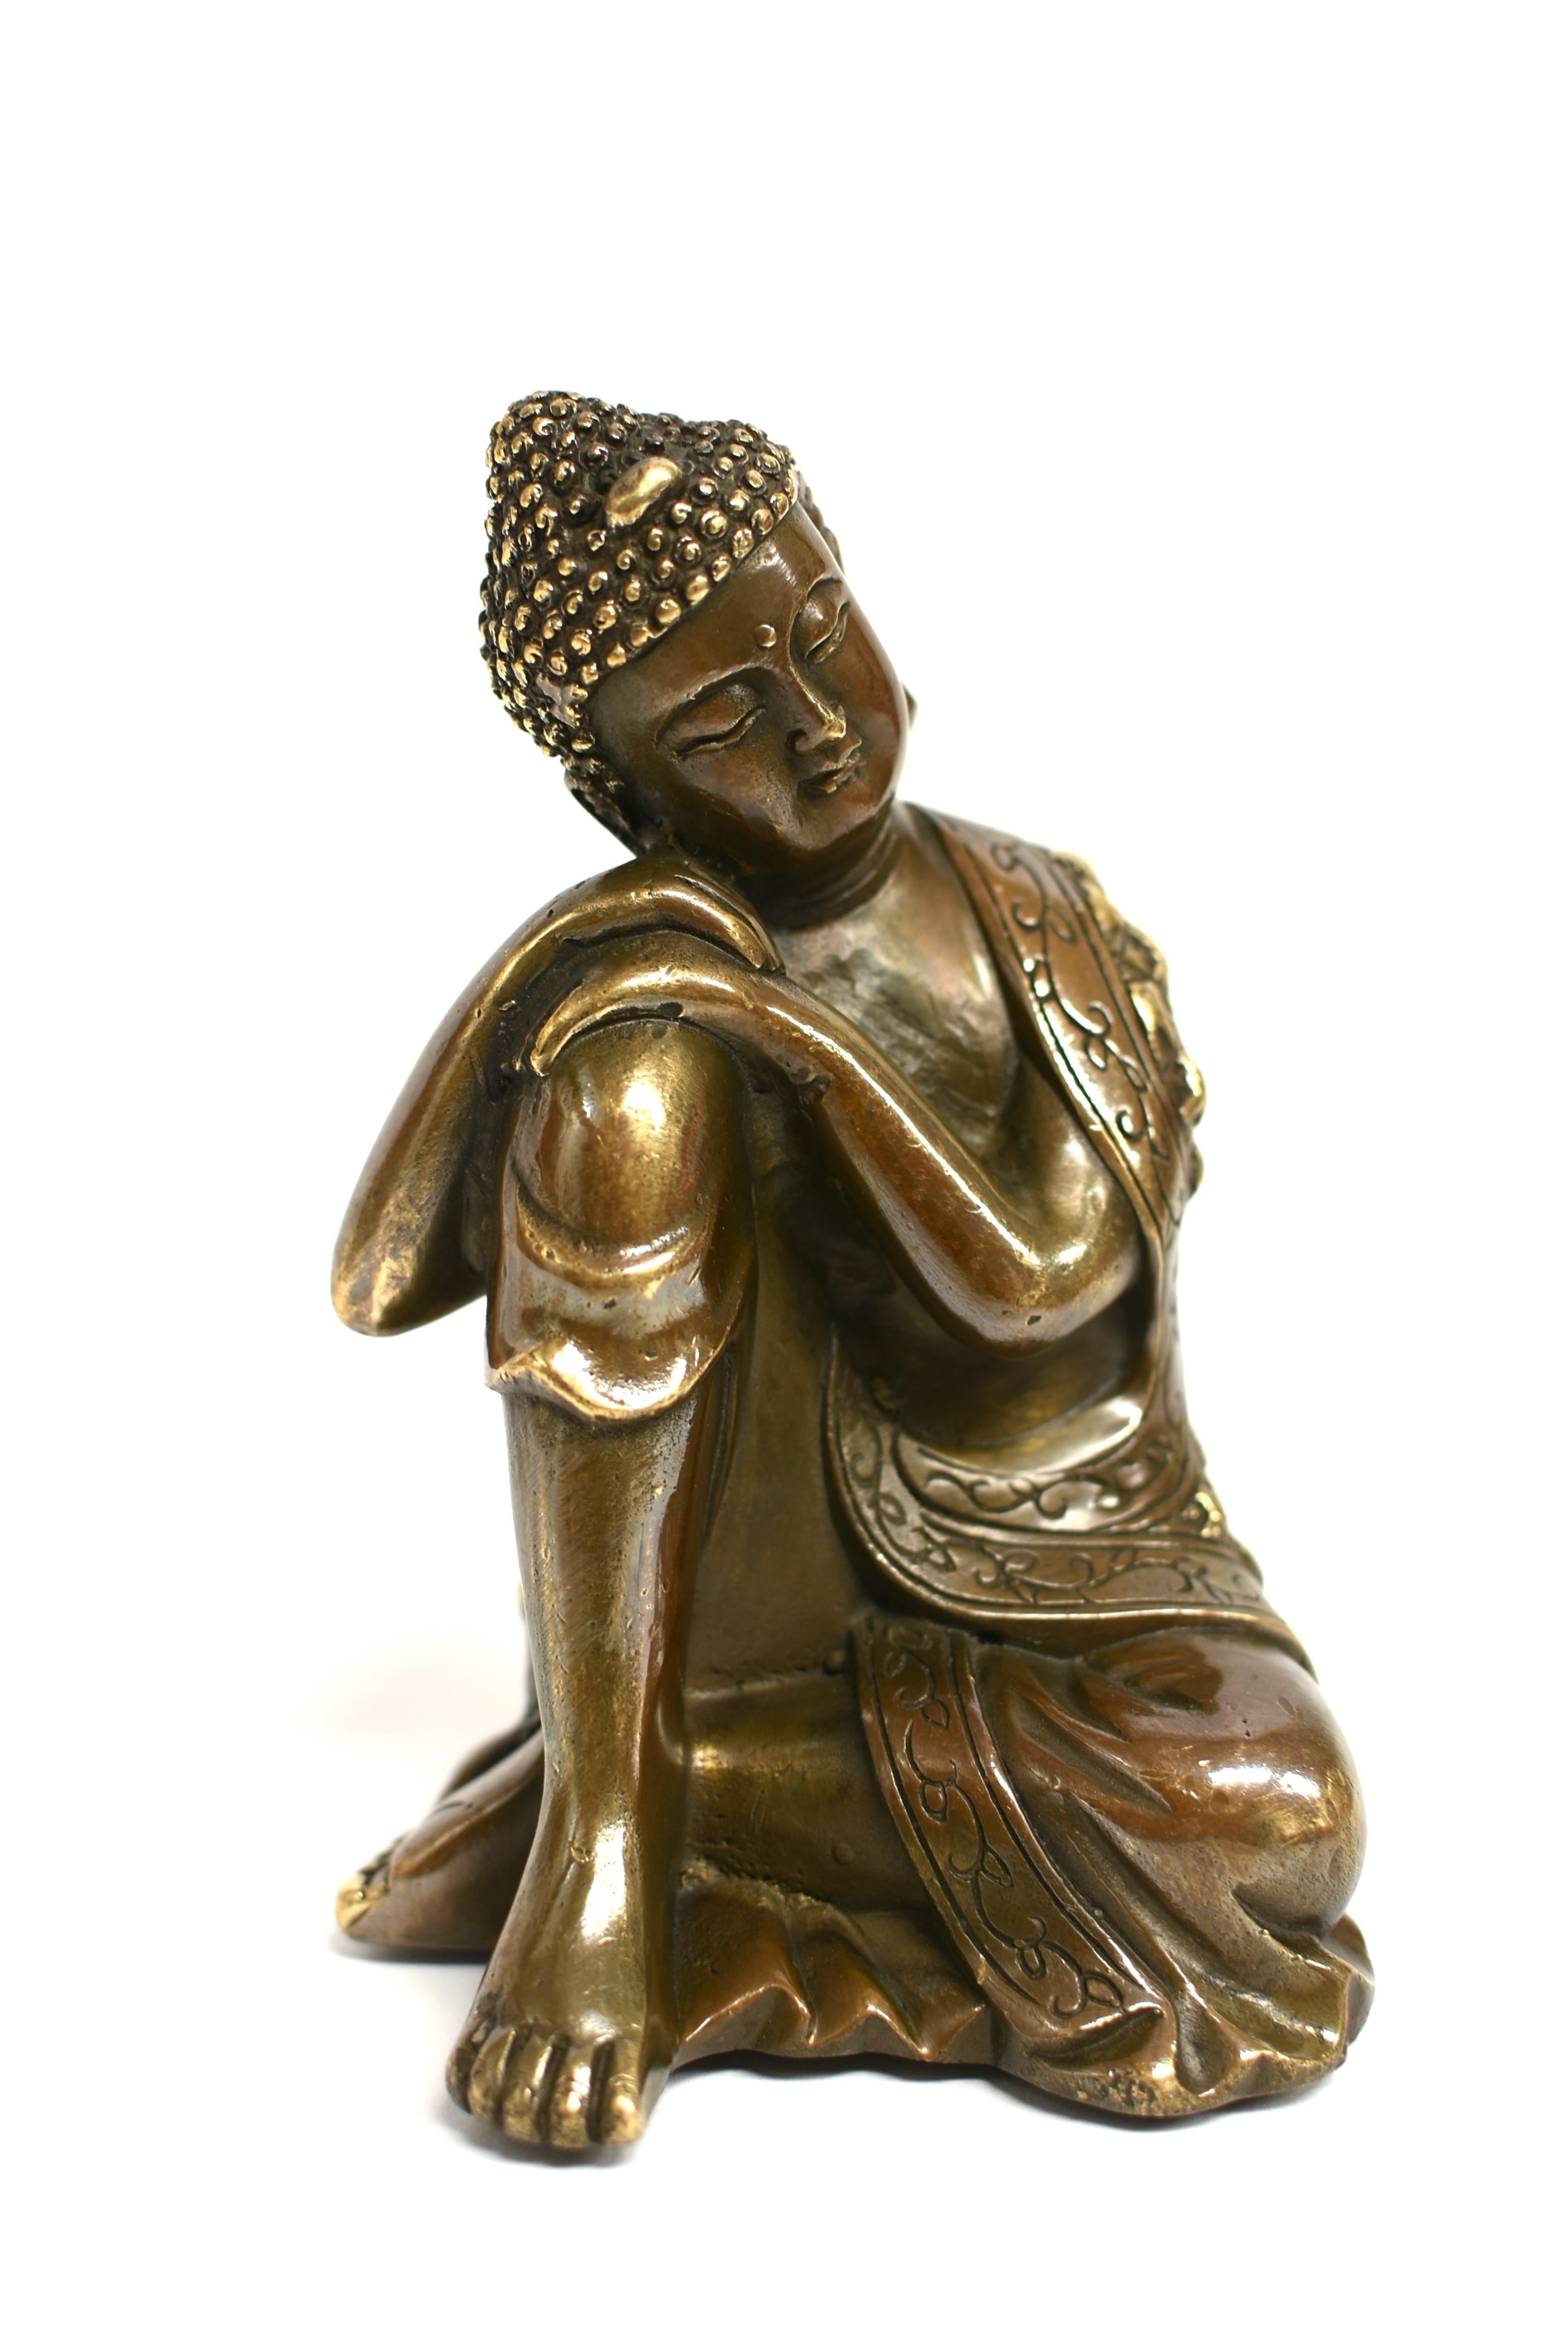 A fine bronze statue depicting Buddha in contemplative mode. The broad face with closed eyes casting a serene aura, framed by long-lobed ears, beneath coiled hair and surmounted by an ushnisha. Buddha wears a long robe falling in graceful folds